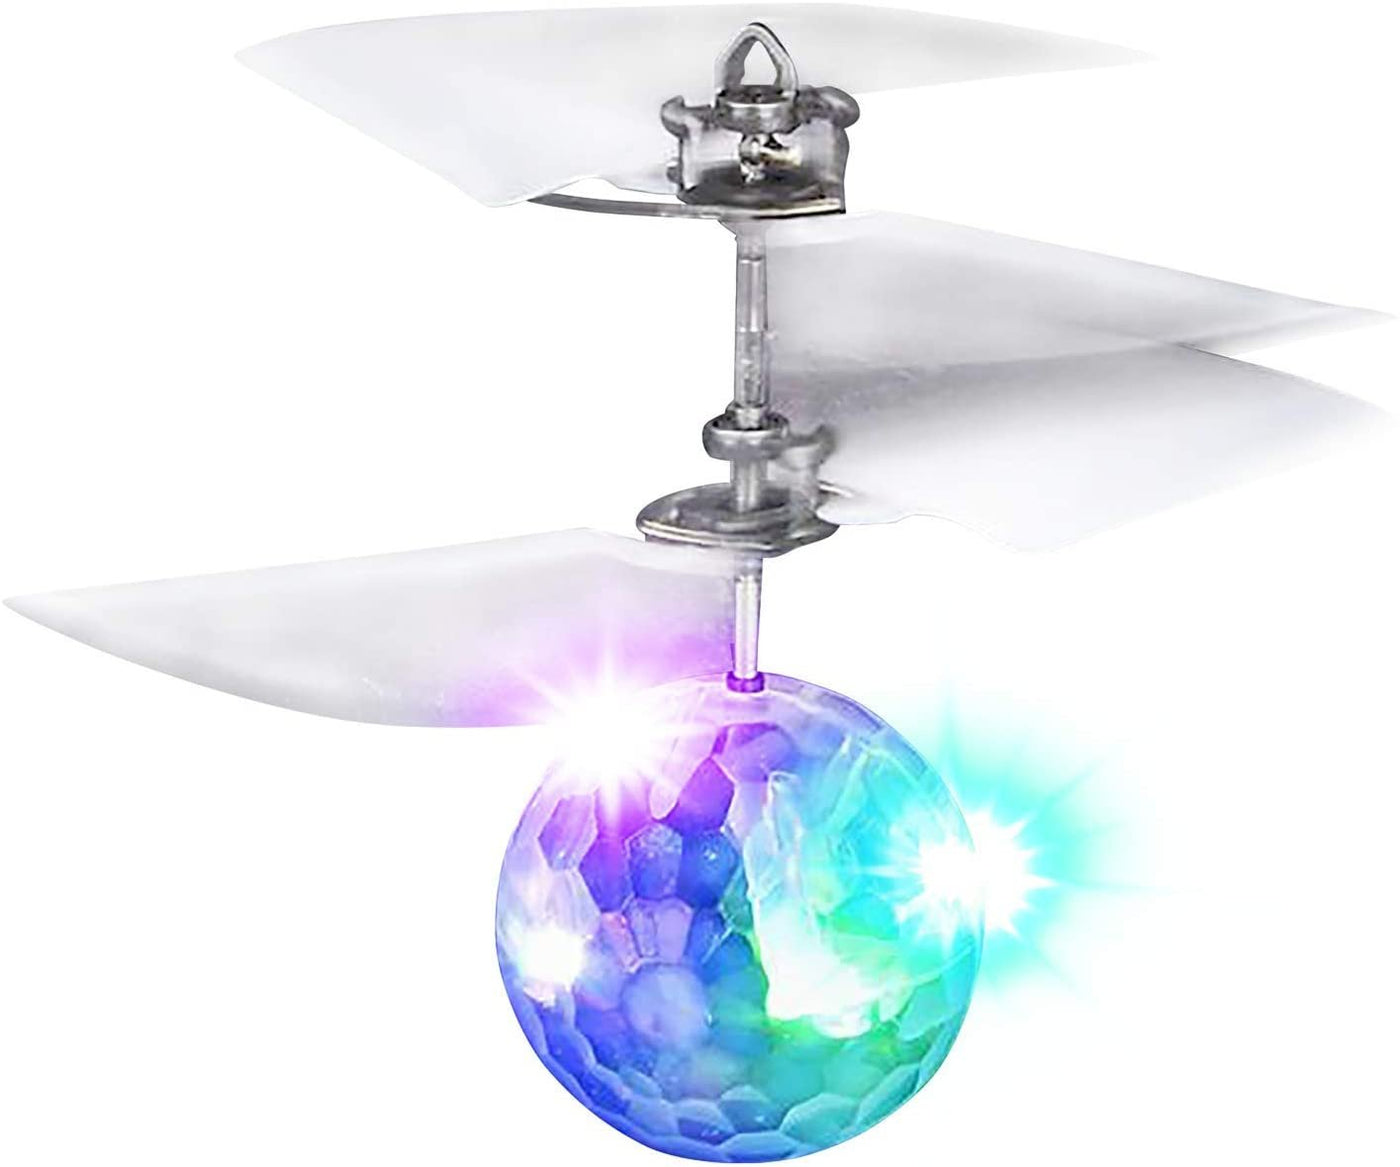 ArtCreativity Mini R/C Crystal Orb Flyer, Rechargeable Hand Operated Flying Ball Toy Drone for Kids with Spectacular Flashing LEDs & Motion Sensors, Best Holiday & Birthday Gift for Boys & Girls 8+